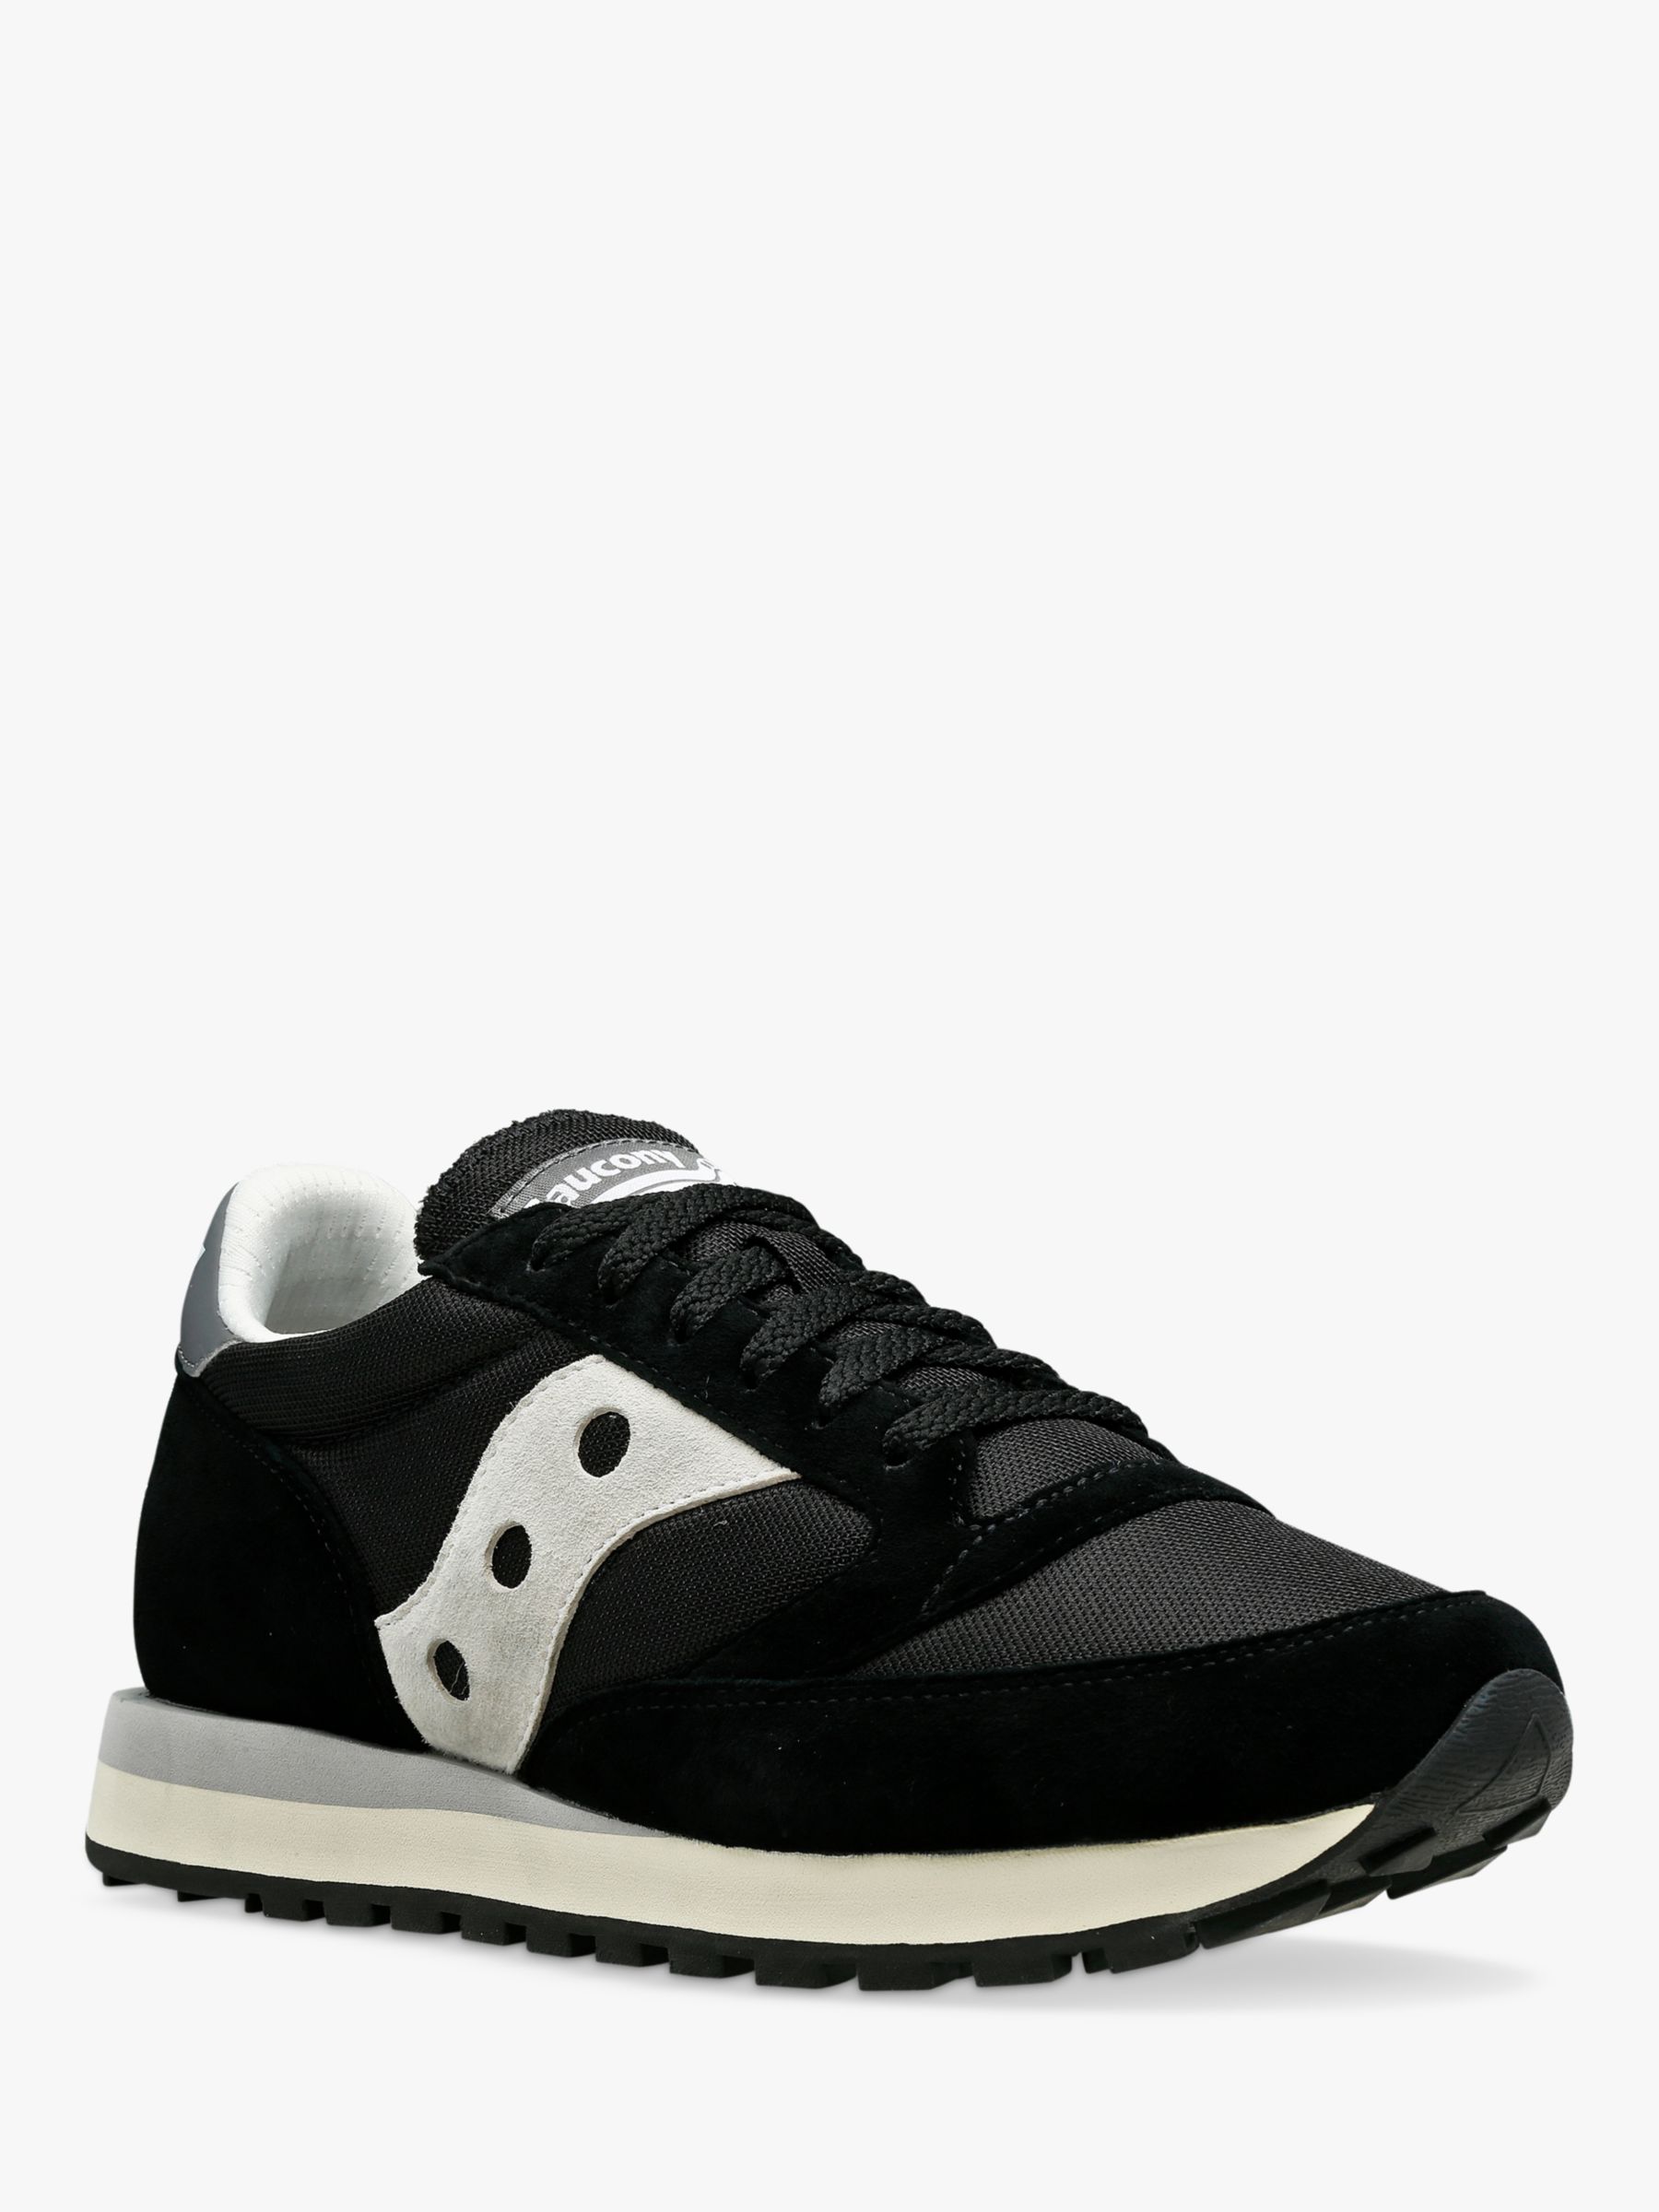 Saucony Jazz 81 Hike Lace Up Trainers, Black at John Lewis & Partners